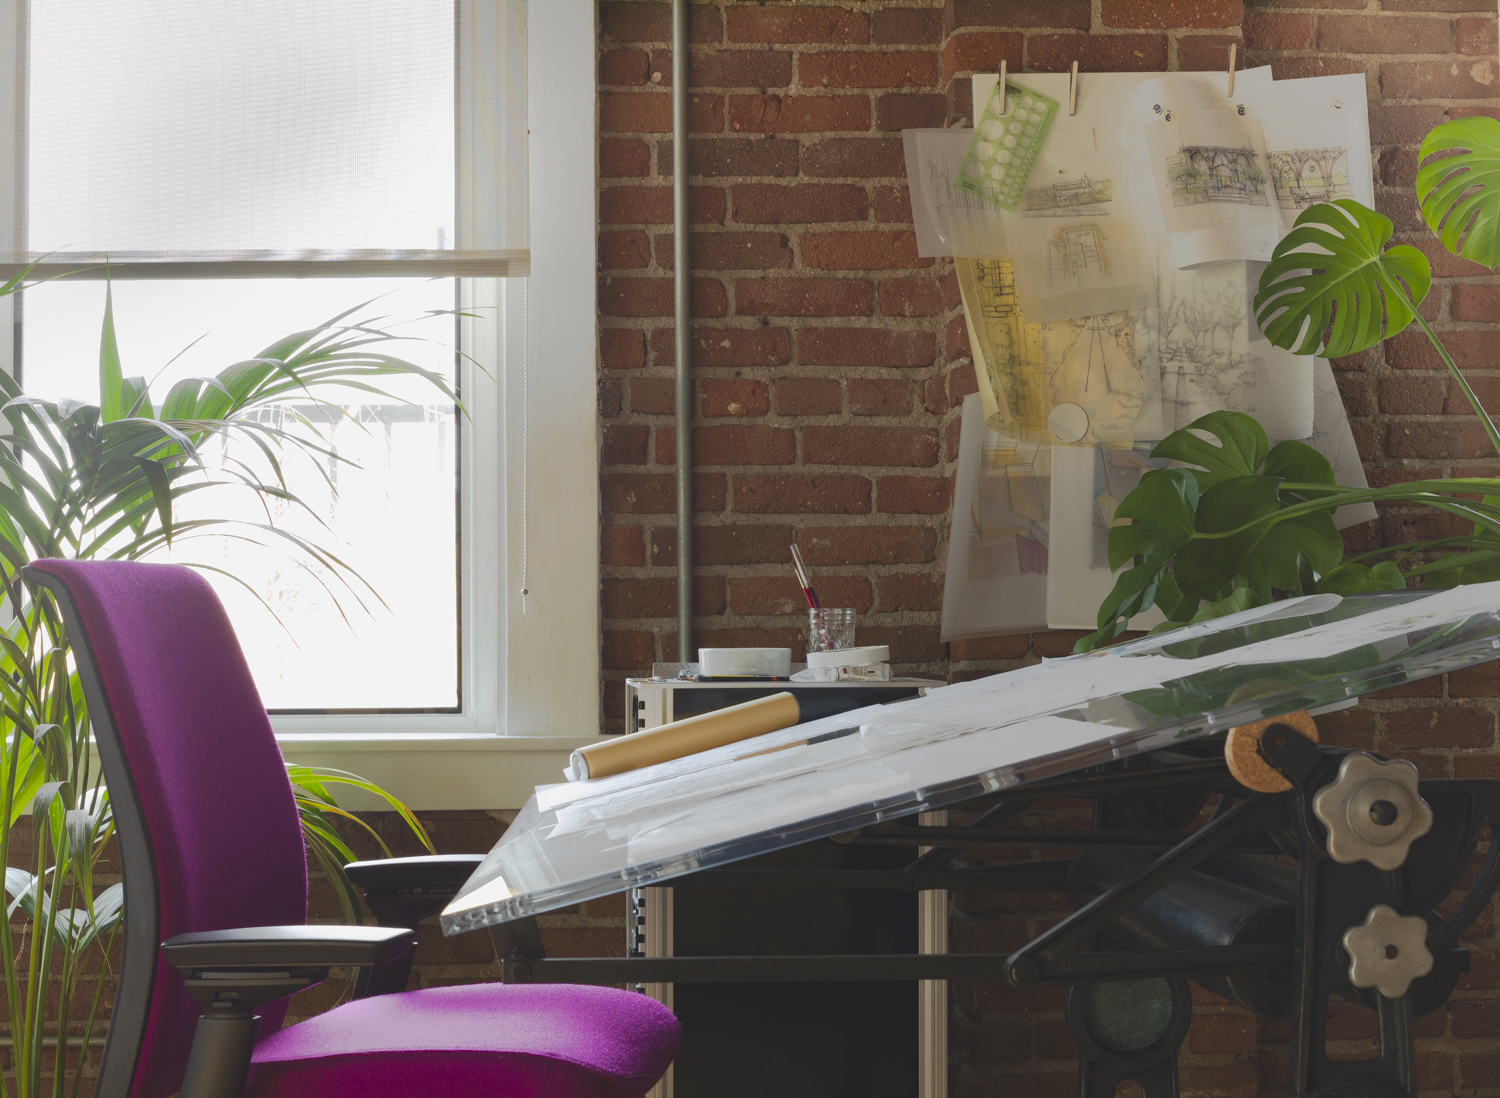 An interior view of the WVH Design studio; a purple architect's chair at an antique drafting table covered in drawings and surrounded by tropical plants.